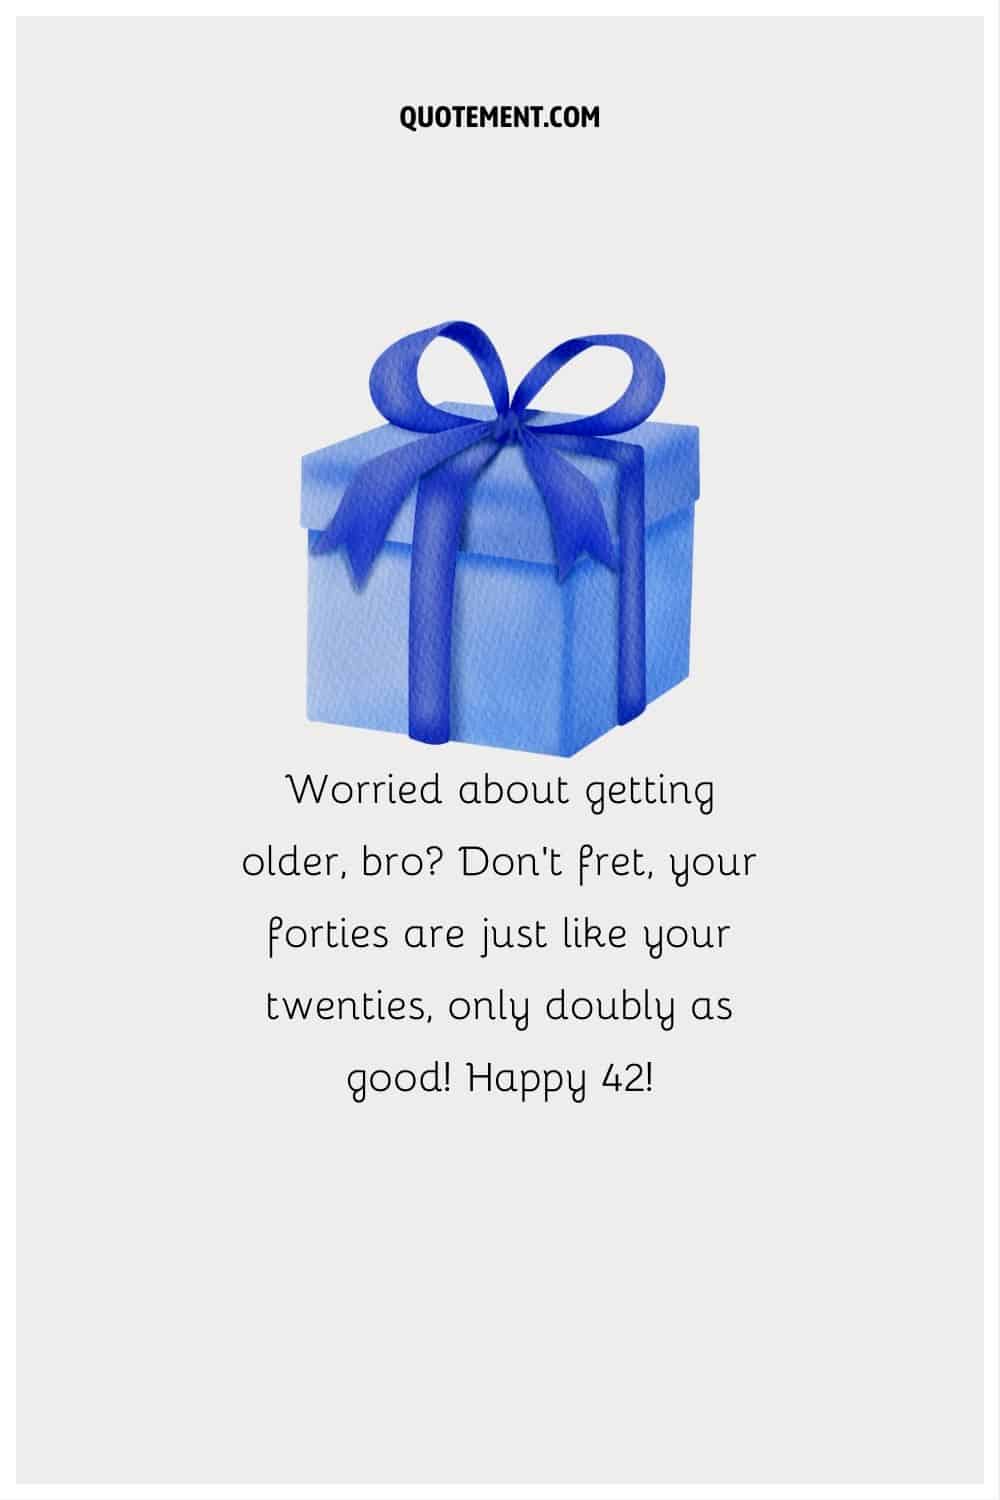 “Worried about getting older, bro Don't fret, your forties are just like your twenties, only doubly as good! Happy 42!”